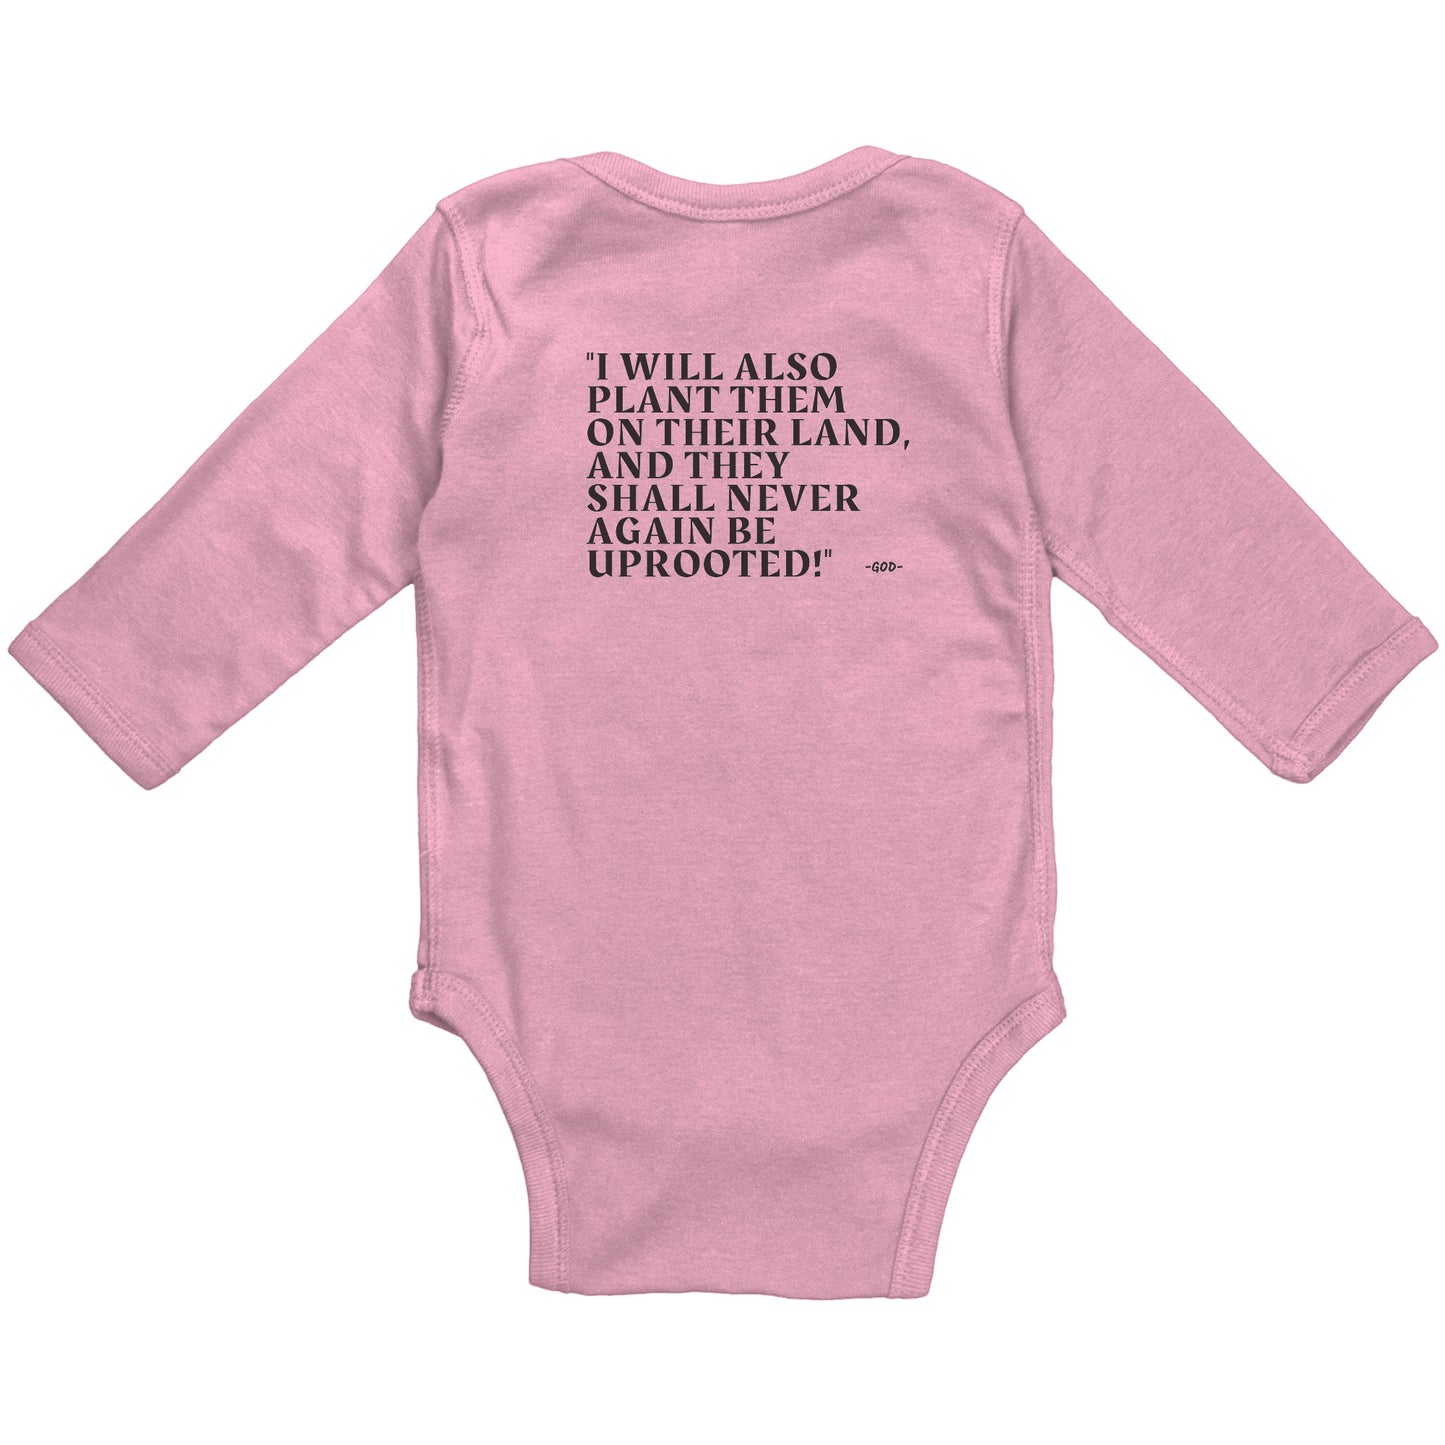 William Michaels Logo Drip Long Sleeve Baby Suit Youth-Black Lettering/Outline